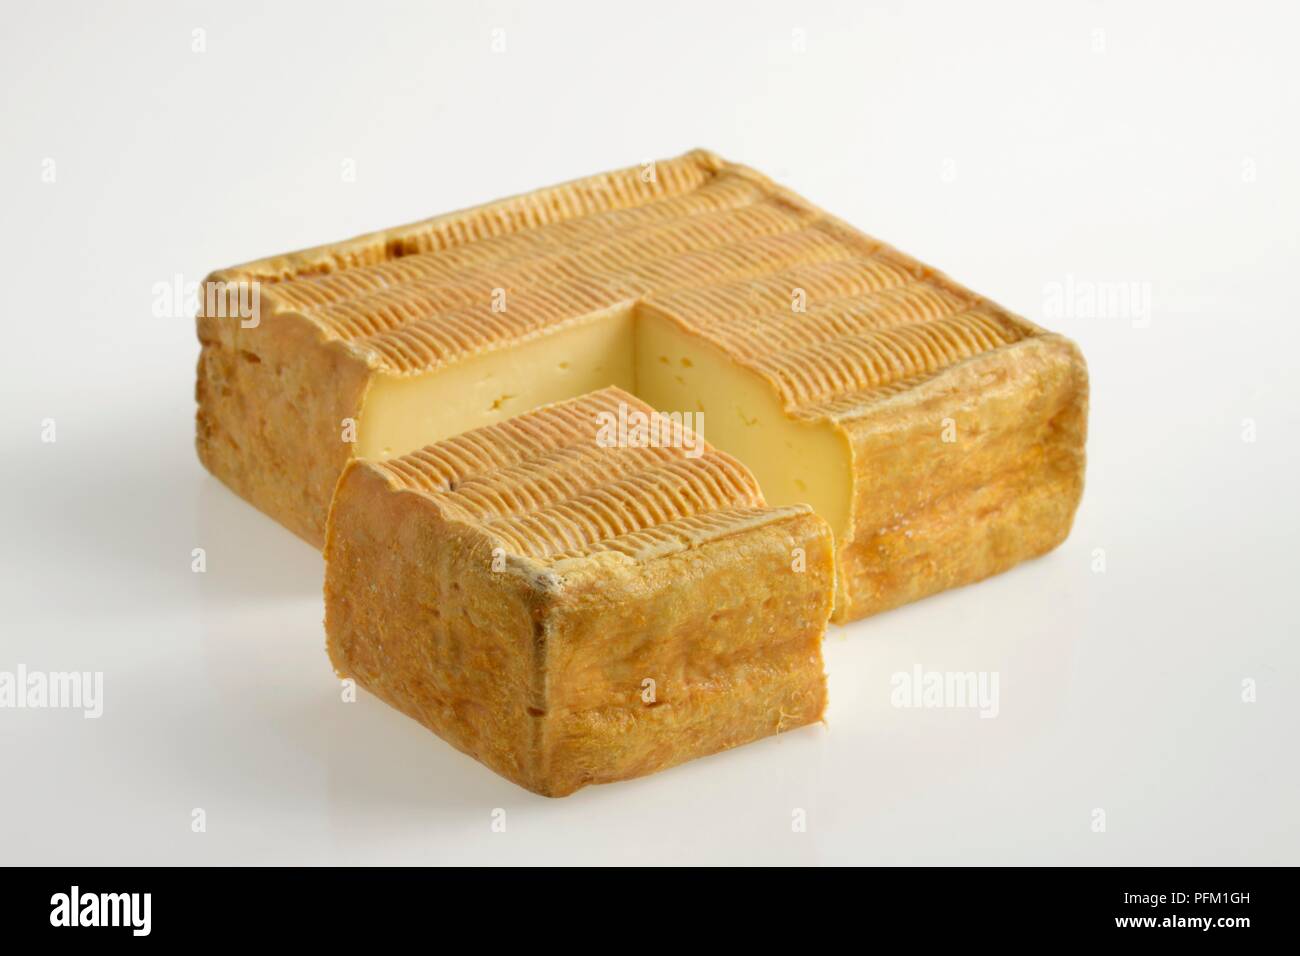 Square and slice of French Maroilles AOC cow's milk cheese distinctive rind Stock Photo